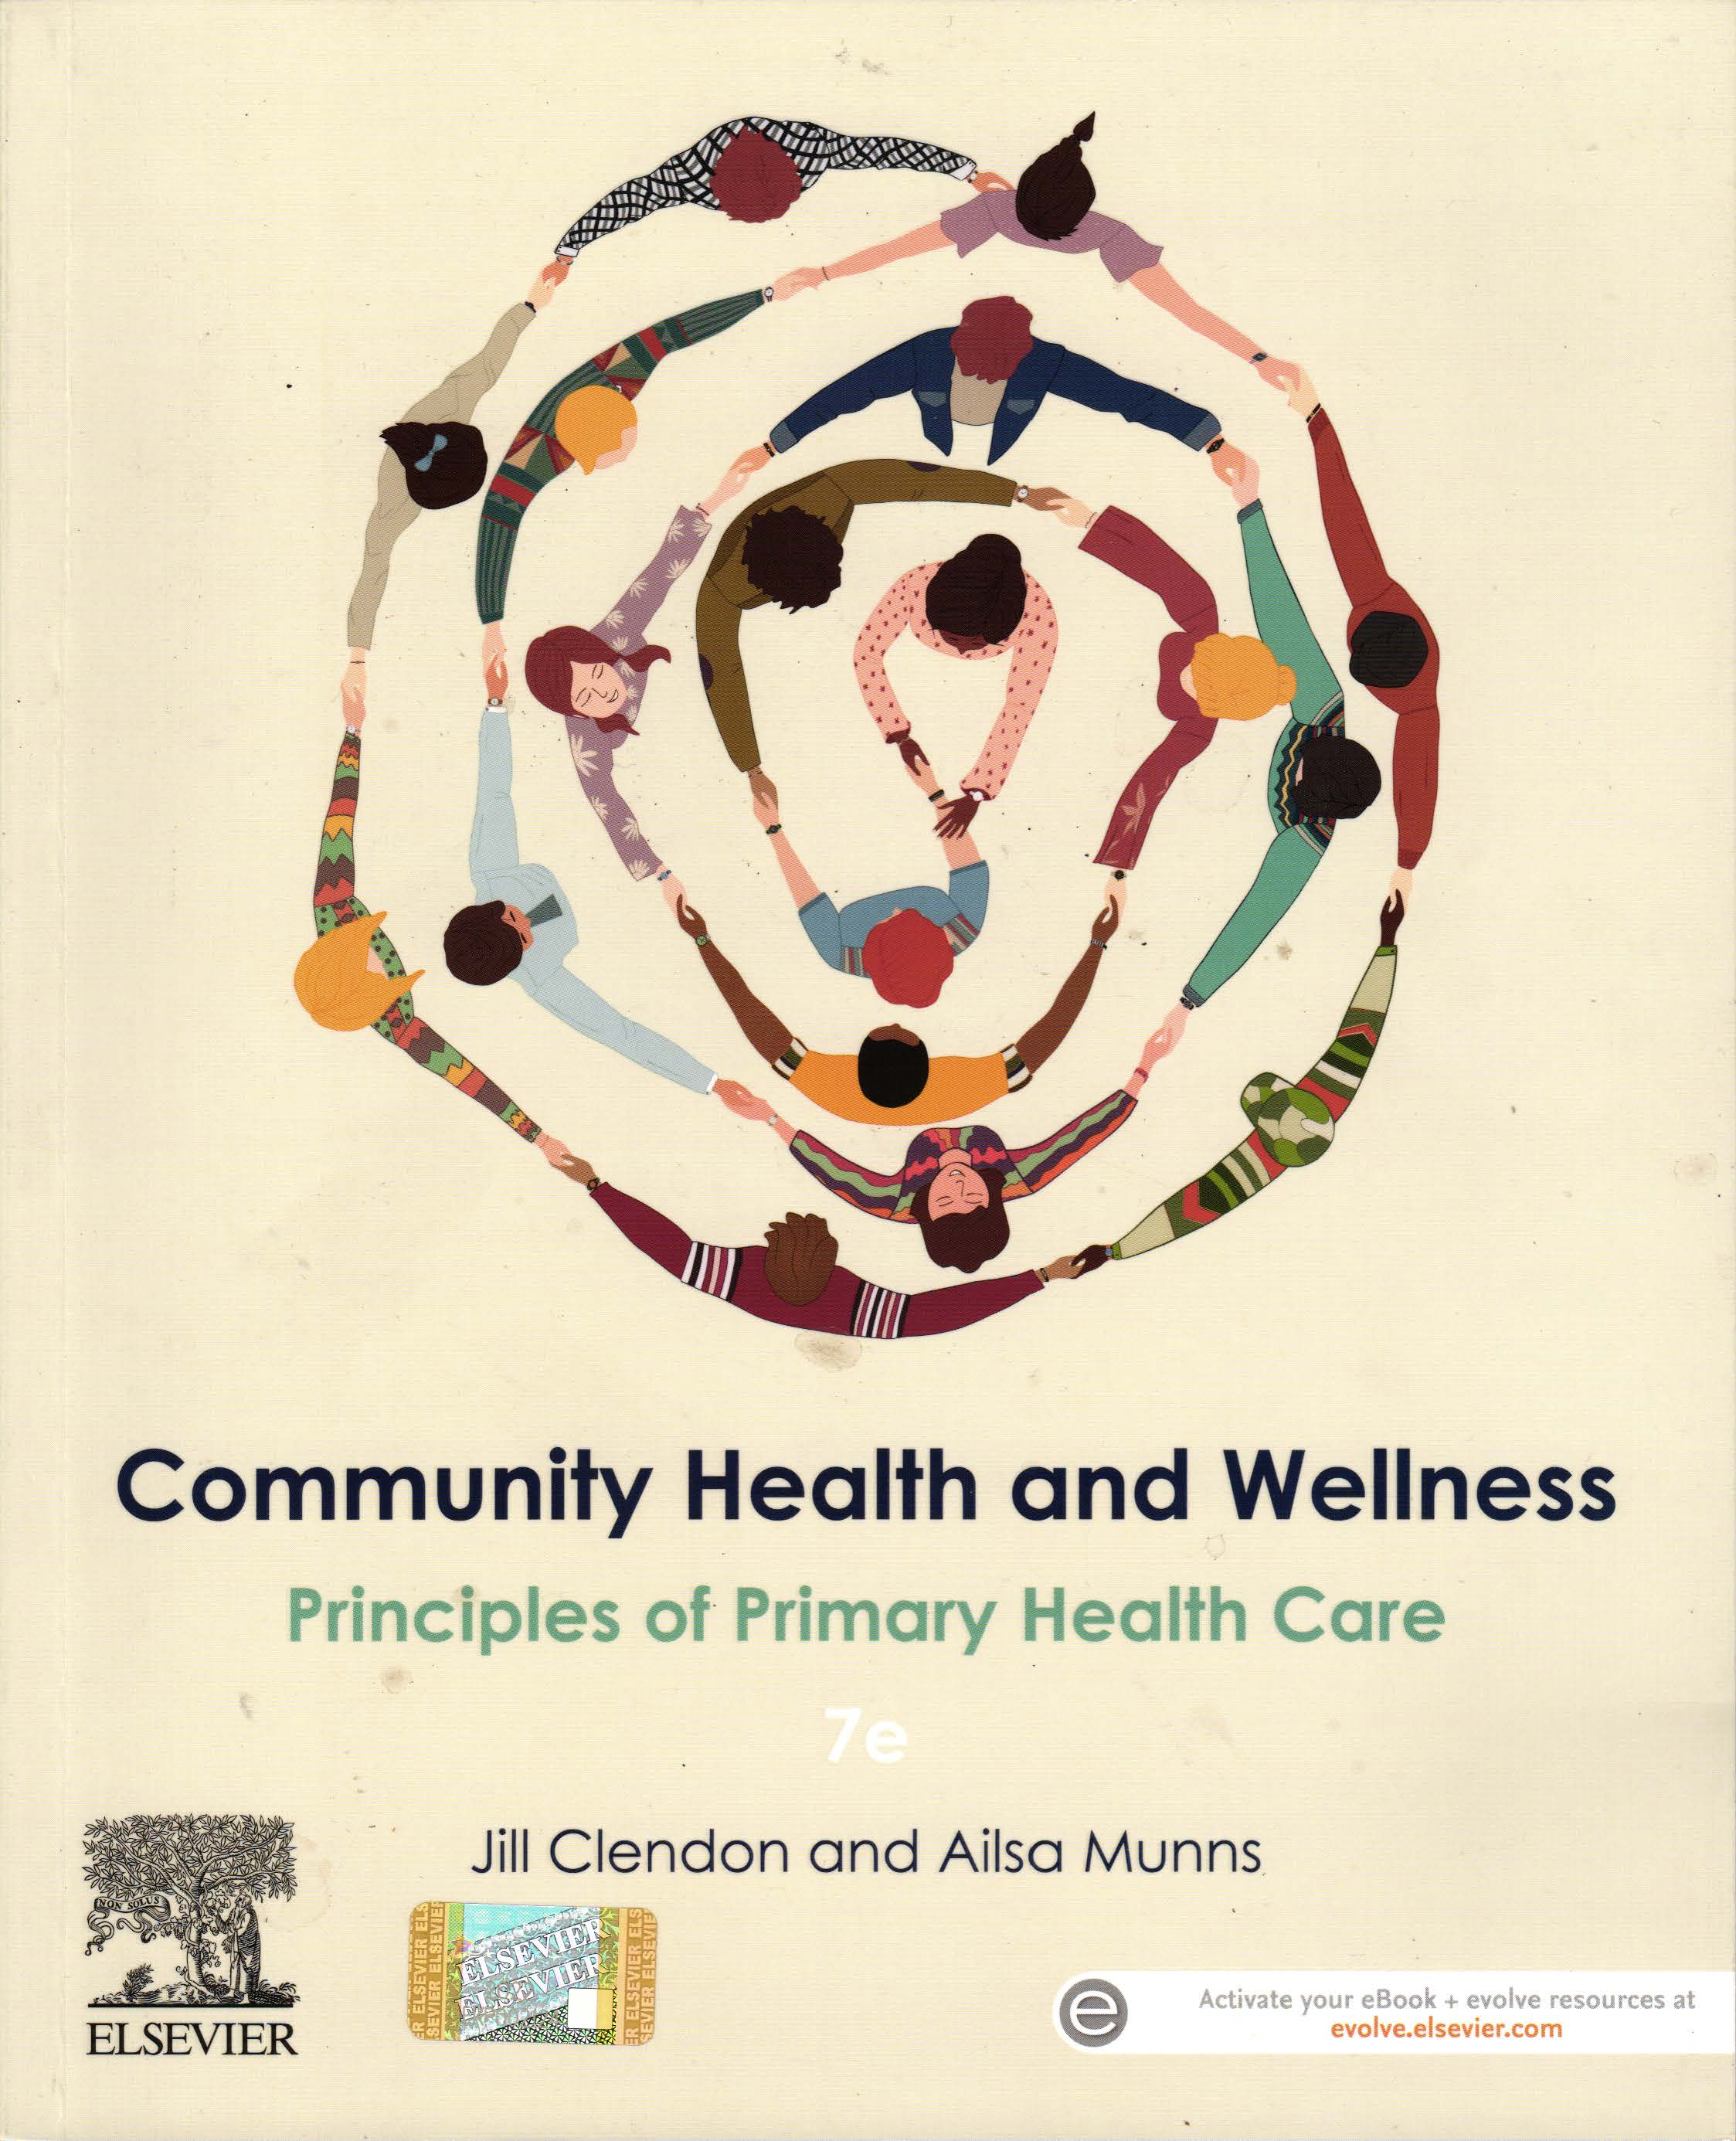 Community health and wellness : principles of primary health care